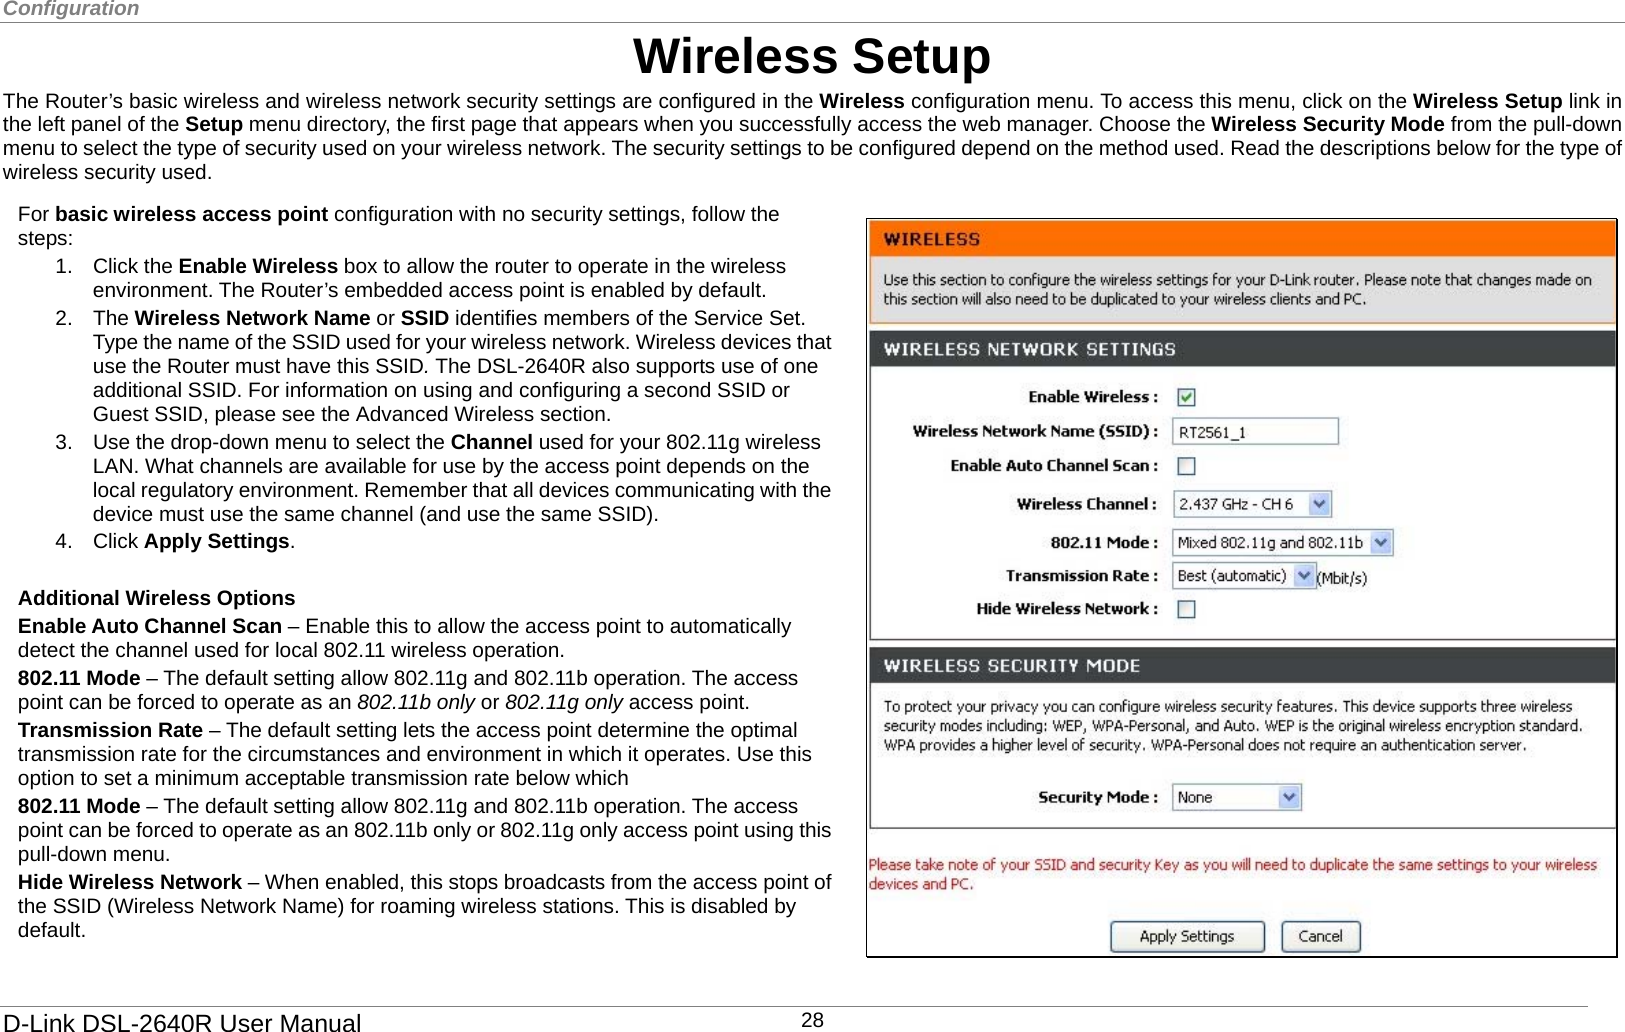 Configuration  Wireless Setup The Router’s basic wireless and wireless network security settings are configured in the Wireless configuration menu. To access this menu, click on the Wireless Setup link in the left panel of the Setup menu directory, the first page that appears when you successfully access the web manager. Choose the Wireless Security Mode from the pull-down menu to select the type of security used on your wireless network. The security settings to be configured depend on the method used. Read the descriptions below for the type of wireless security used.  802.11 Mode – The default setting allow 802.11g and 802.11b operation. The access point can be forced to operate as an 802.11b only or 802.11g only access point using this pull-down menu. Hide Wireless Network – When enabled, this stops broadcasts from the access point of the SSID (Wireless Network Name) for roaming wireless stations. This is disabled by default.  For basic wireless access point configuration with no security settings, follow the steps: 1. Click the Enable Wireless box to allow the router to operate in the wireless environment. The Router’s embedded access point is enabled by default.   2. The Wireless Network Name or SSID identifies members of the Service Set. Type the name of the SSID used for your wireless network. Wireless devices that use the Router must have this SSID. The DSL-2640R also supports use of one additional SSID. For information on using and configuring a second SSID or Guest SSID, please see the Advanced Wireless section.   3.  Use the drop-down menu to select the Channel used for your 802.11g wireless LAN. What channels are available for use by the access point depends on the local regulatory environment. Remember that all devices communicating with the device must use the same channel (and use the same SSID).   4. Click Apply Settings.  Additional Wireless Options Enable Auto Channel Scan – Enable this to allow the access point to automatically detect the channel used for local 802.11 wireless operation.   802.11 Mode – The default setting allow 802.11g and 802.11b operation. The access point can be forced to operate as an 802.11b only or 802.11g only access point.   Transmission Rate – The default setting lets the access point determine the optimal transmission rate for the circumstances and environment in which it operates. Use this option to set a minimum acceptable transmission rate below which     D-Link DSL-2640R User Manual 28